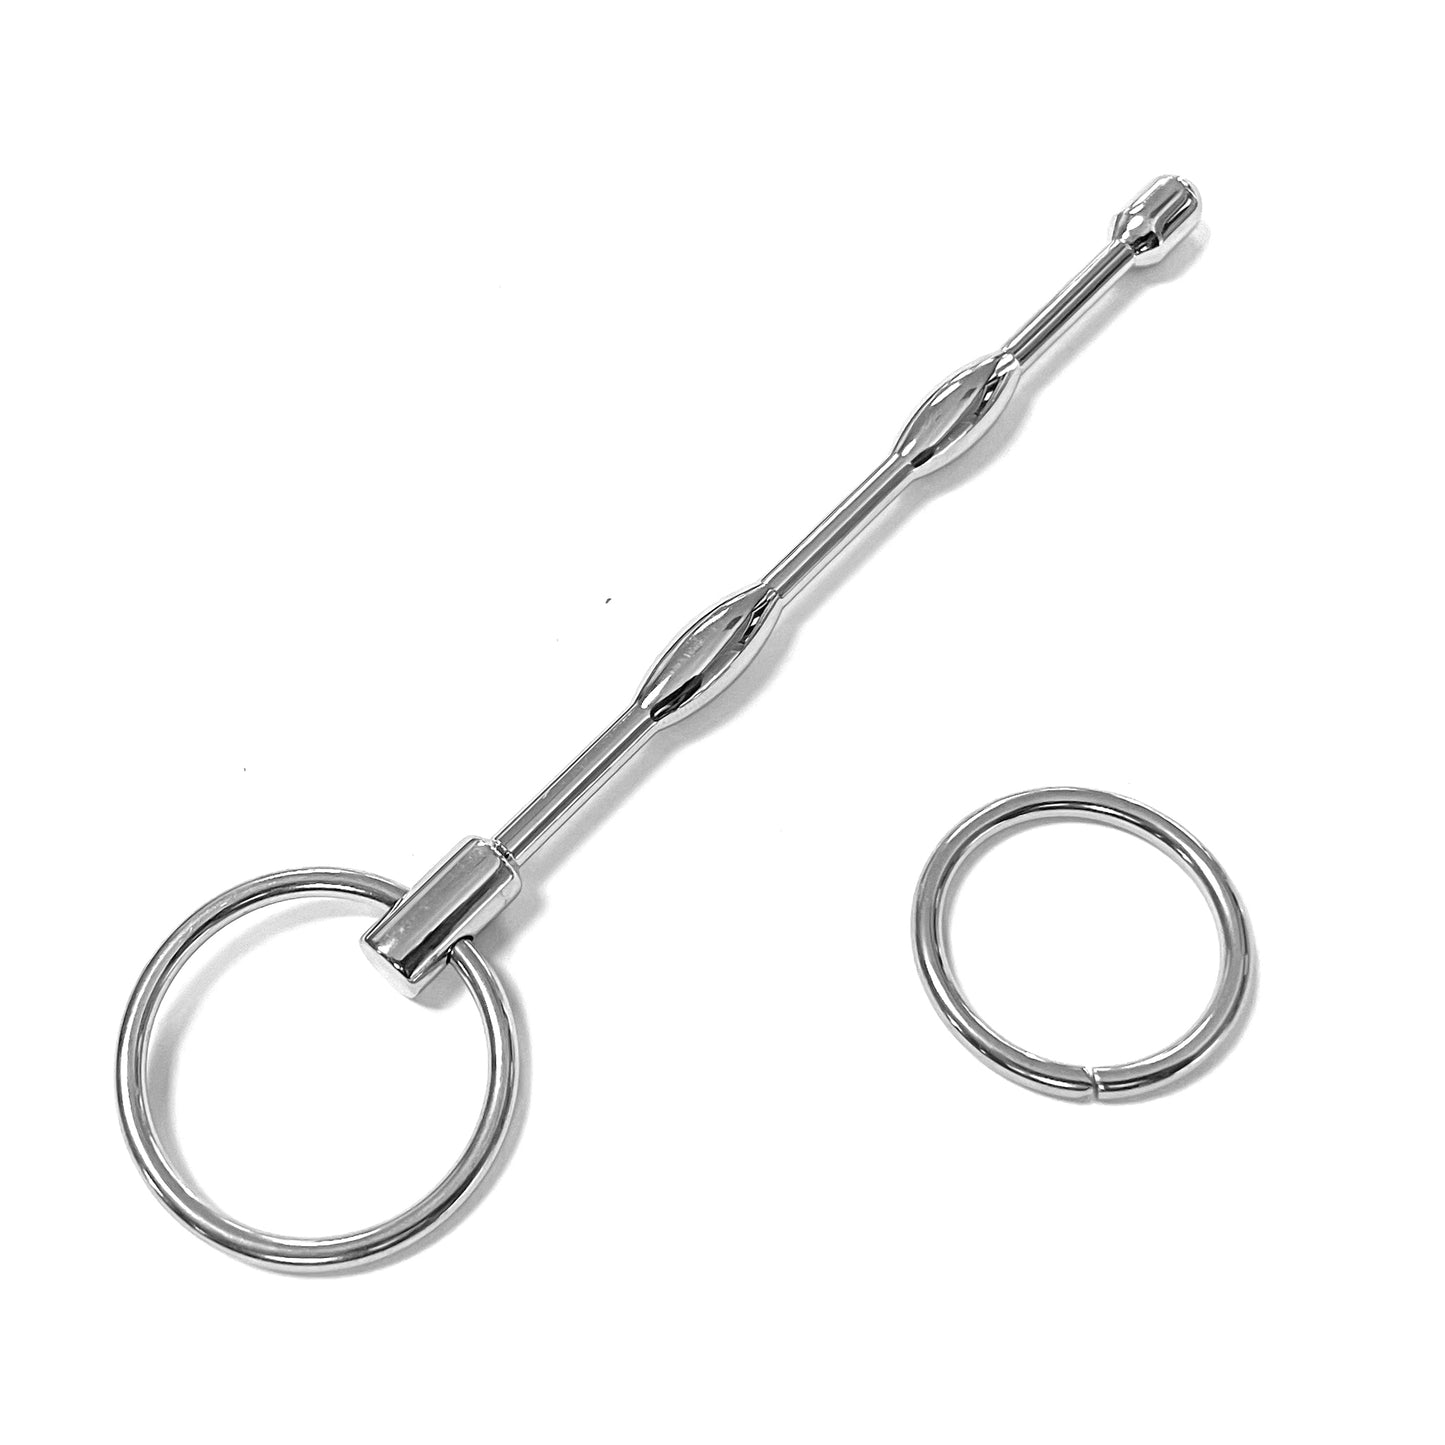 URETHRAL STAINLESS 5IN BEAD WITH RING END